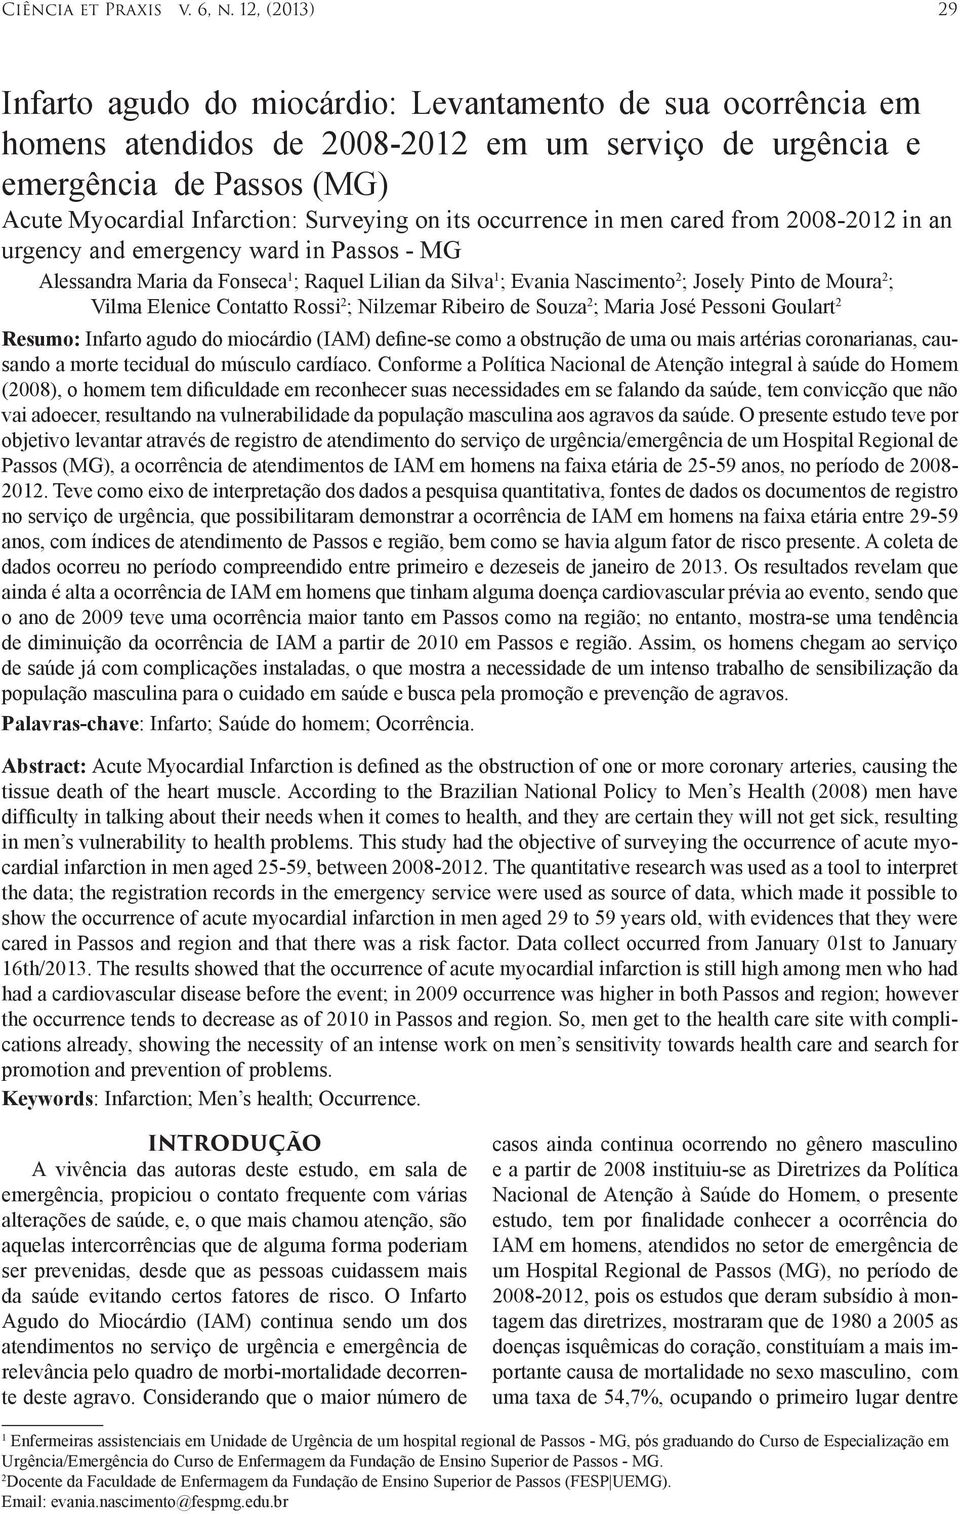 on its occurrence in men cared from 2008-2012 in an urgency and emergency ward in Passos - MG Alessandra Maria da Fonseca 1 ; Raquel Lilian da Silva 1 ; Evania Nascimento 2 ; Josely Pinto de Moura 2